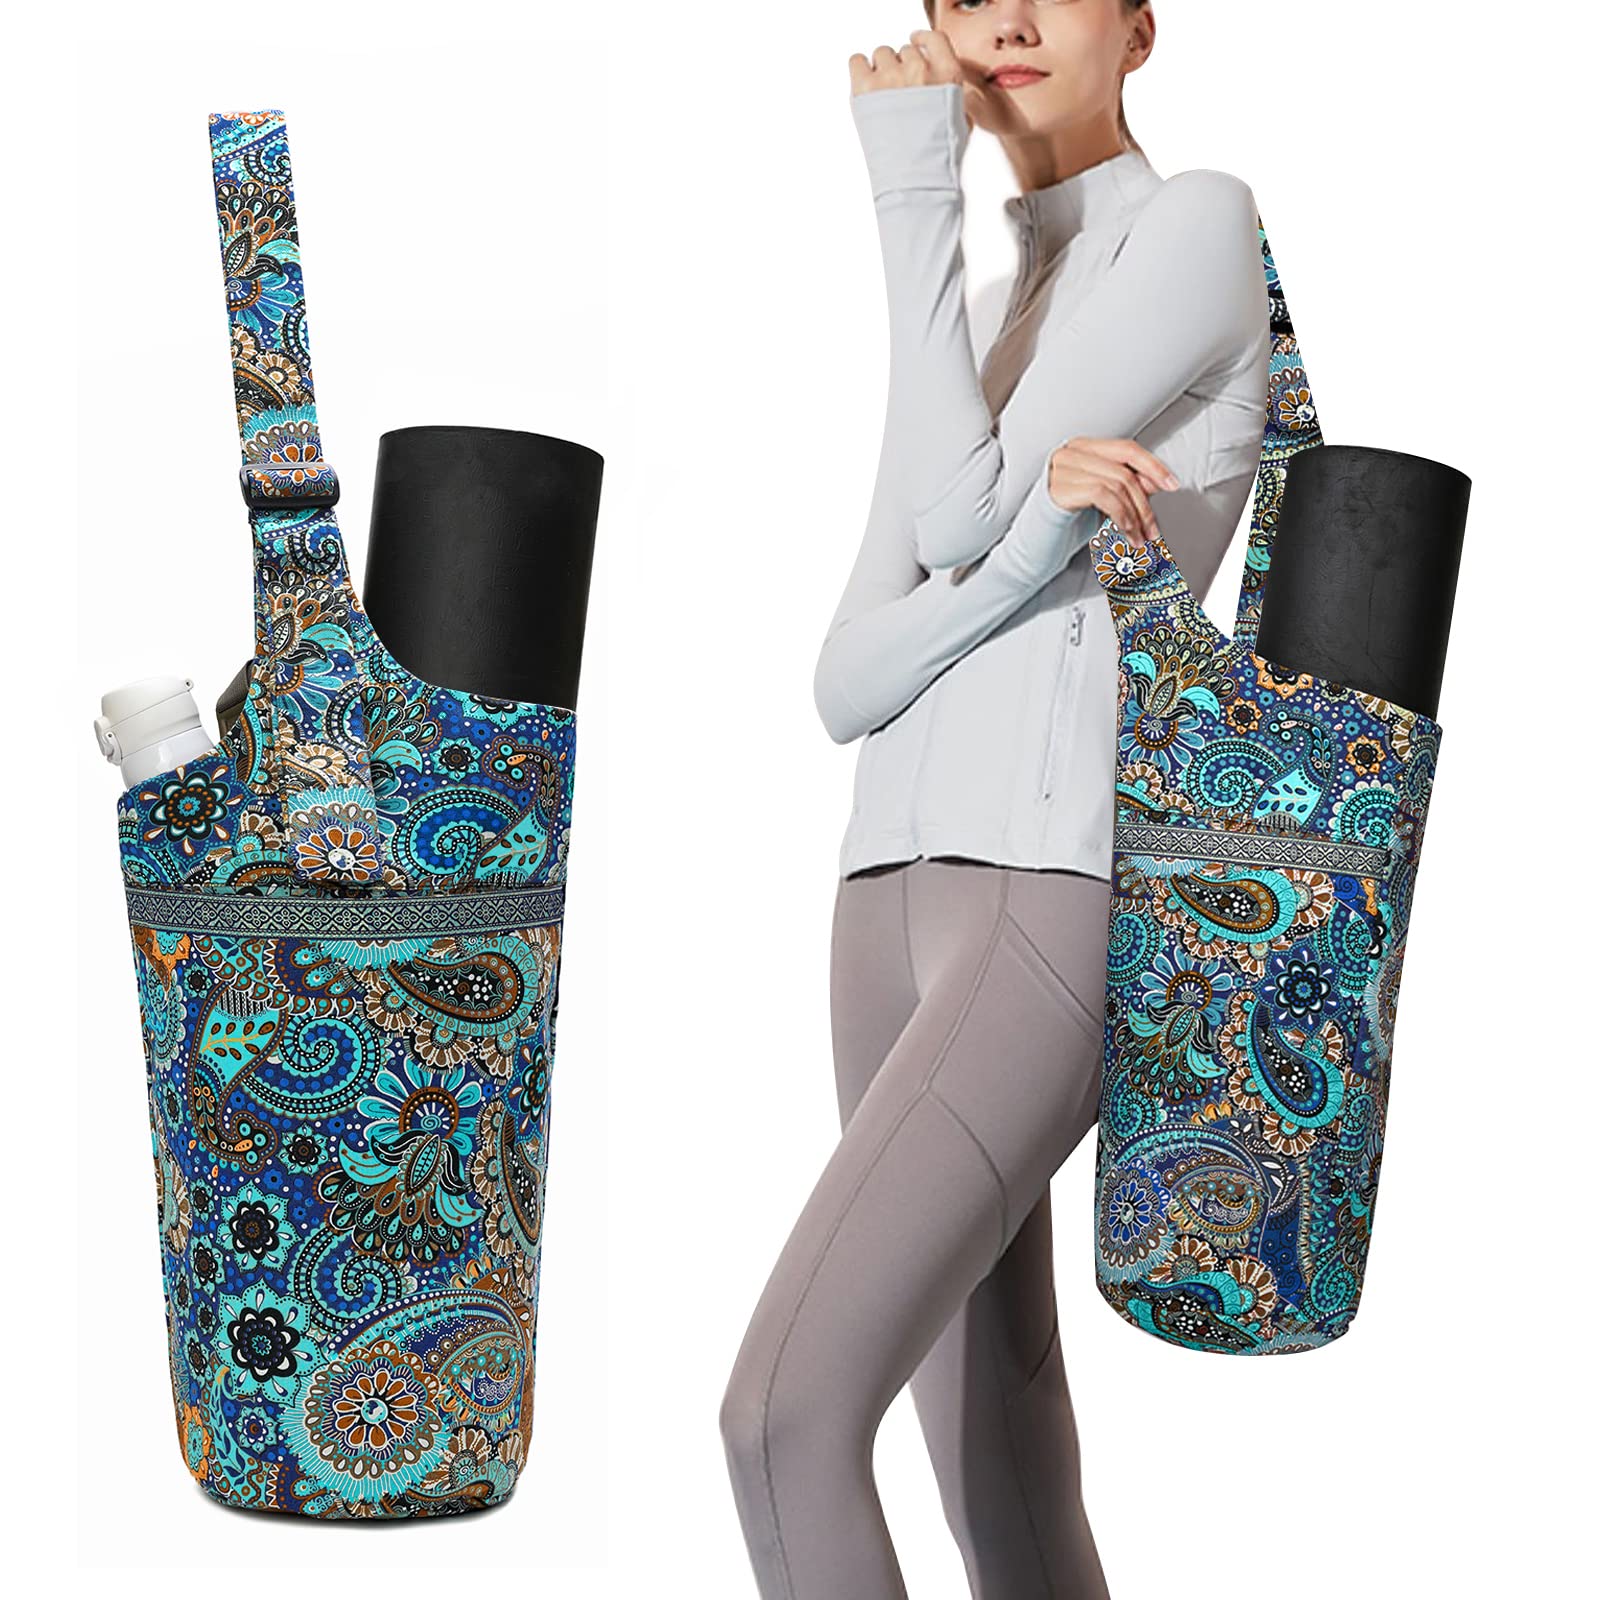 Yoga Mat Carrier Sling with Pocket - Yoga Purse